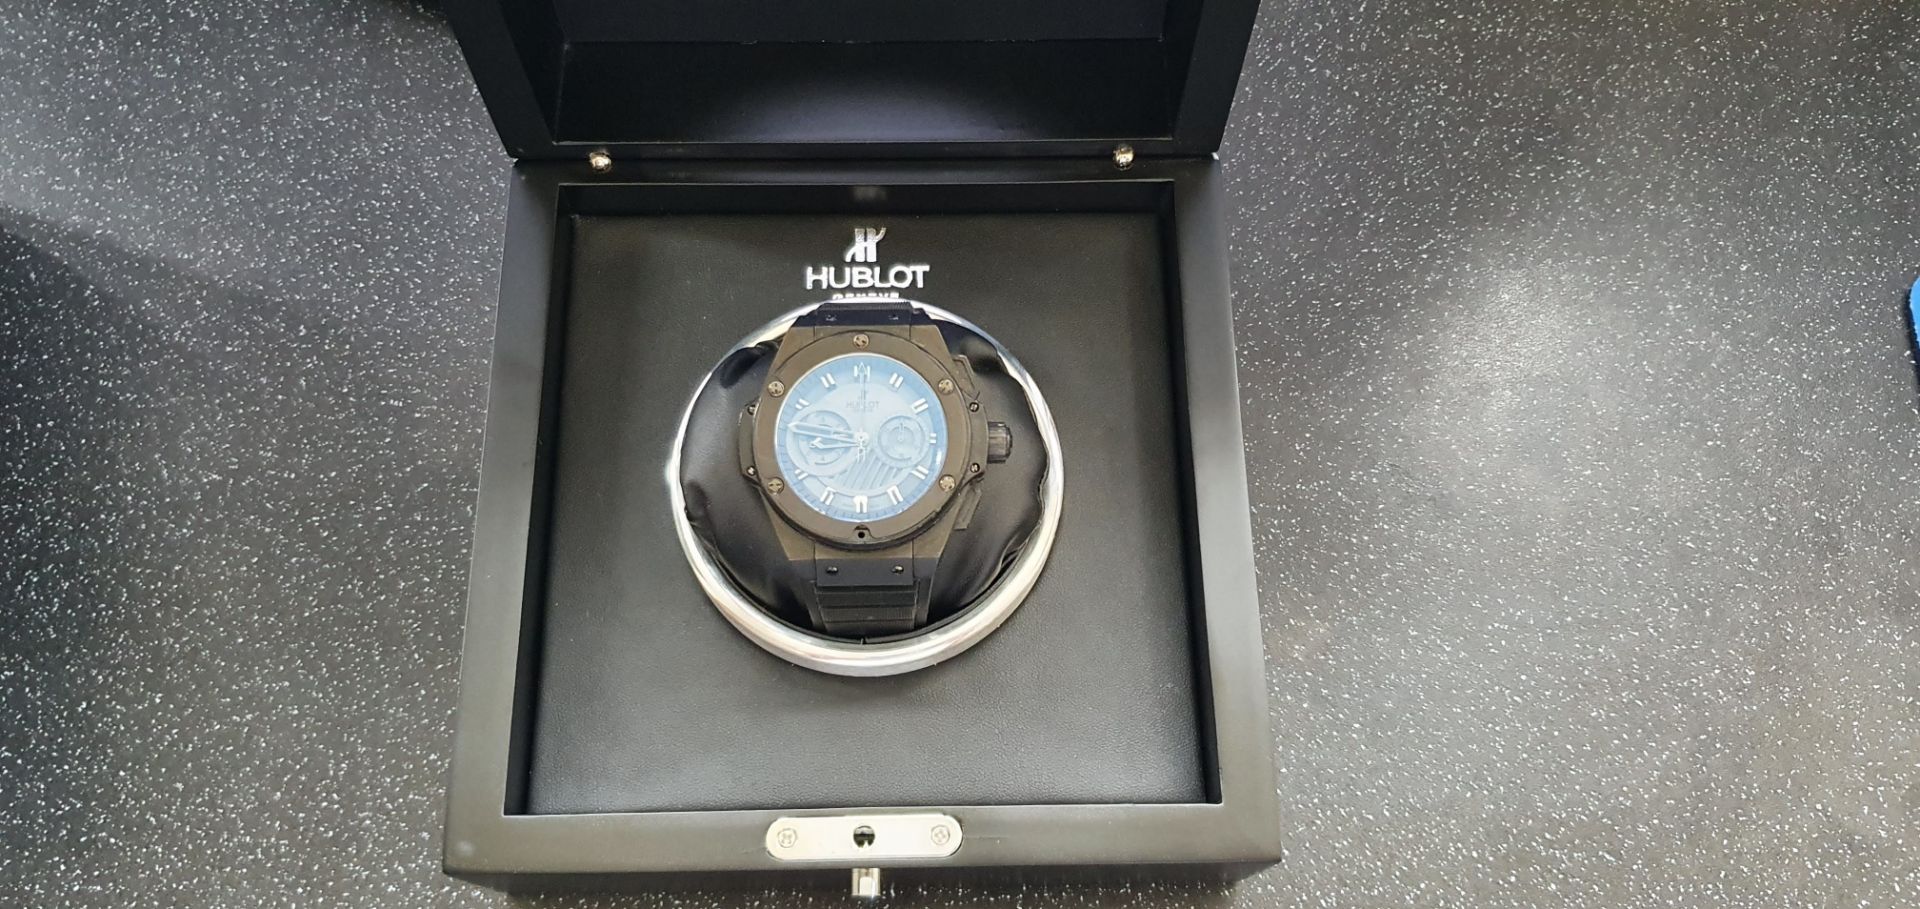 Hublot King Power Limited Edition Foudroyante Black - Assume not Genuine - Box & Booklets included - Image 4 of 10